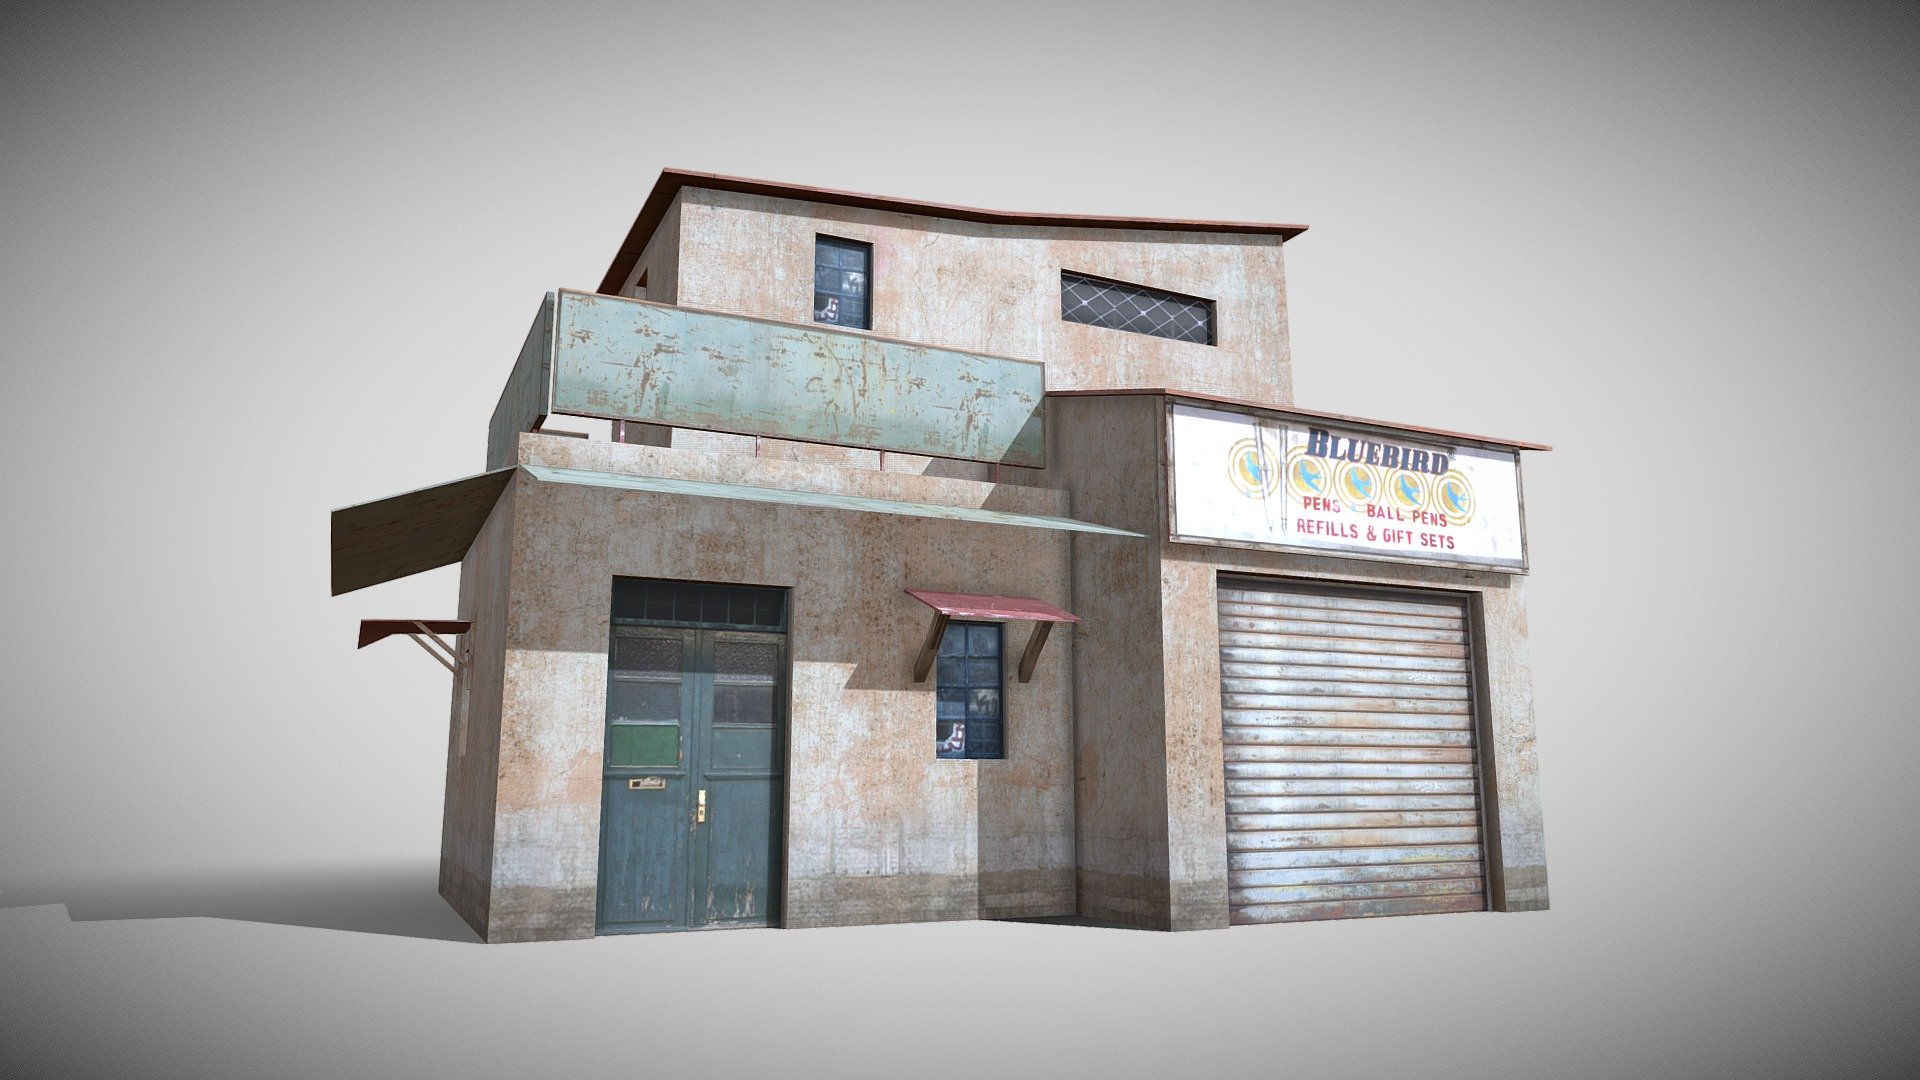 Game Ready 3D Old House /slum Native file format 3Ds max 2022 Other formats Blender 4.0 ,FBX, OBJ, All formats include materials &amp; textures

Polygons- 349   Vertices-425

Materials &amp; textures. 1 Diffuse Map 2048x2048 - Slum X13 - Buy Royalty Free 3D model by 3DRK (@3DRK98) 3d model